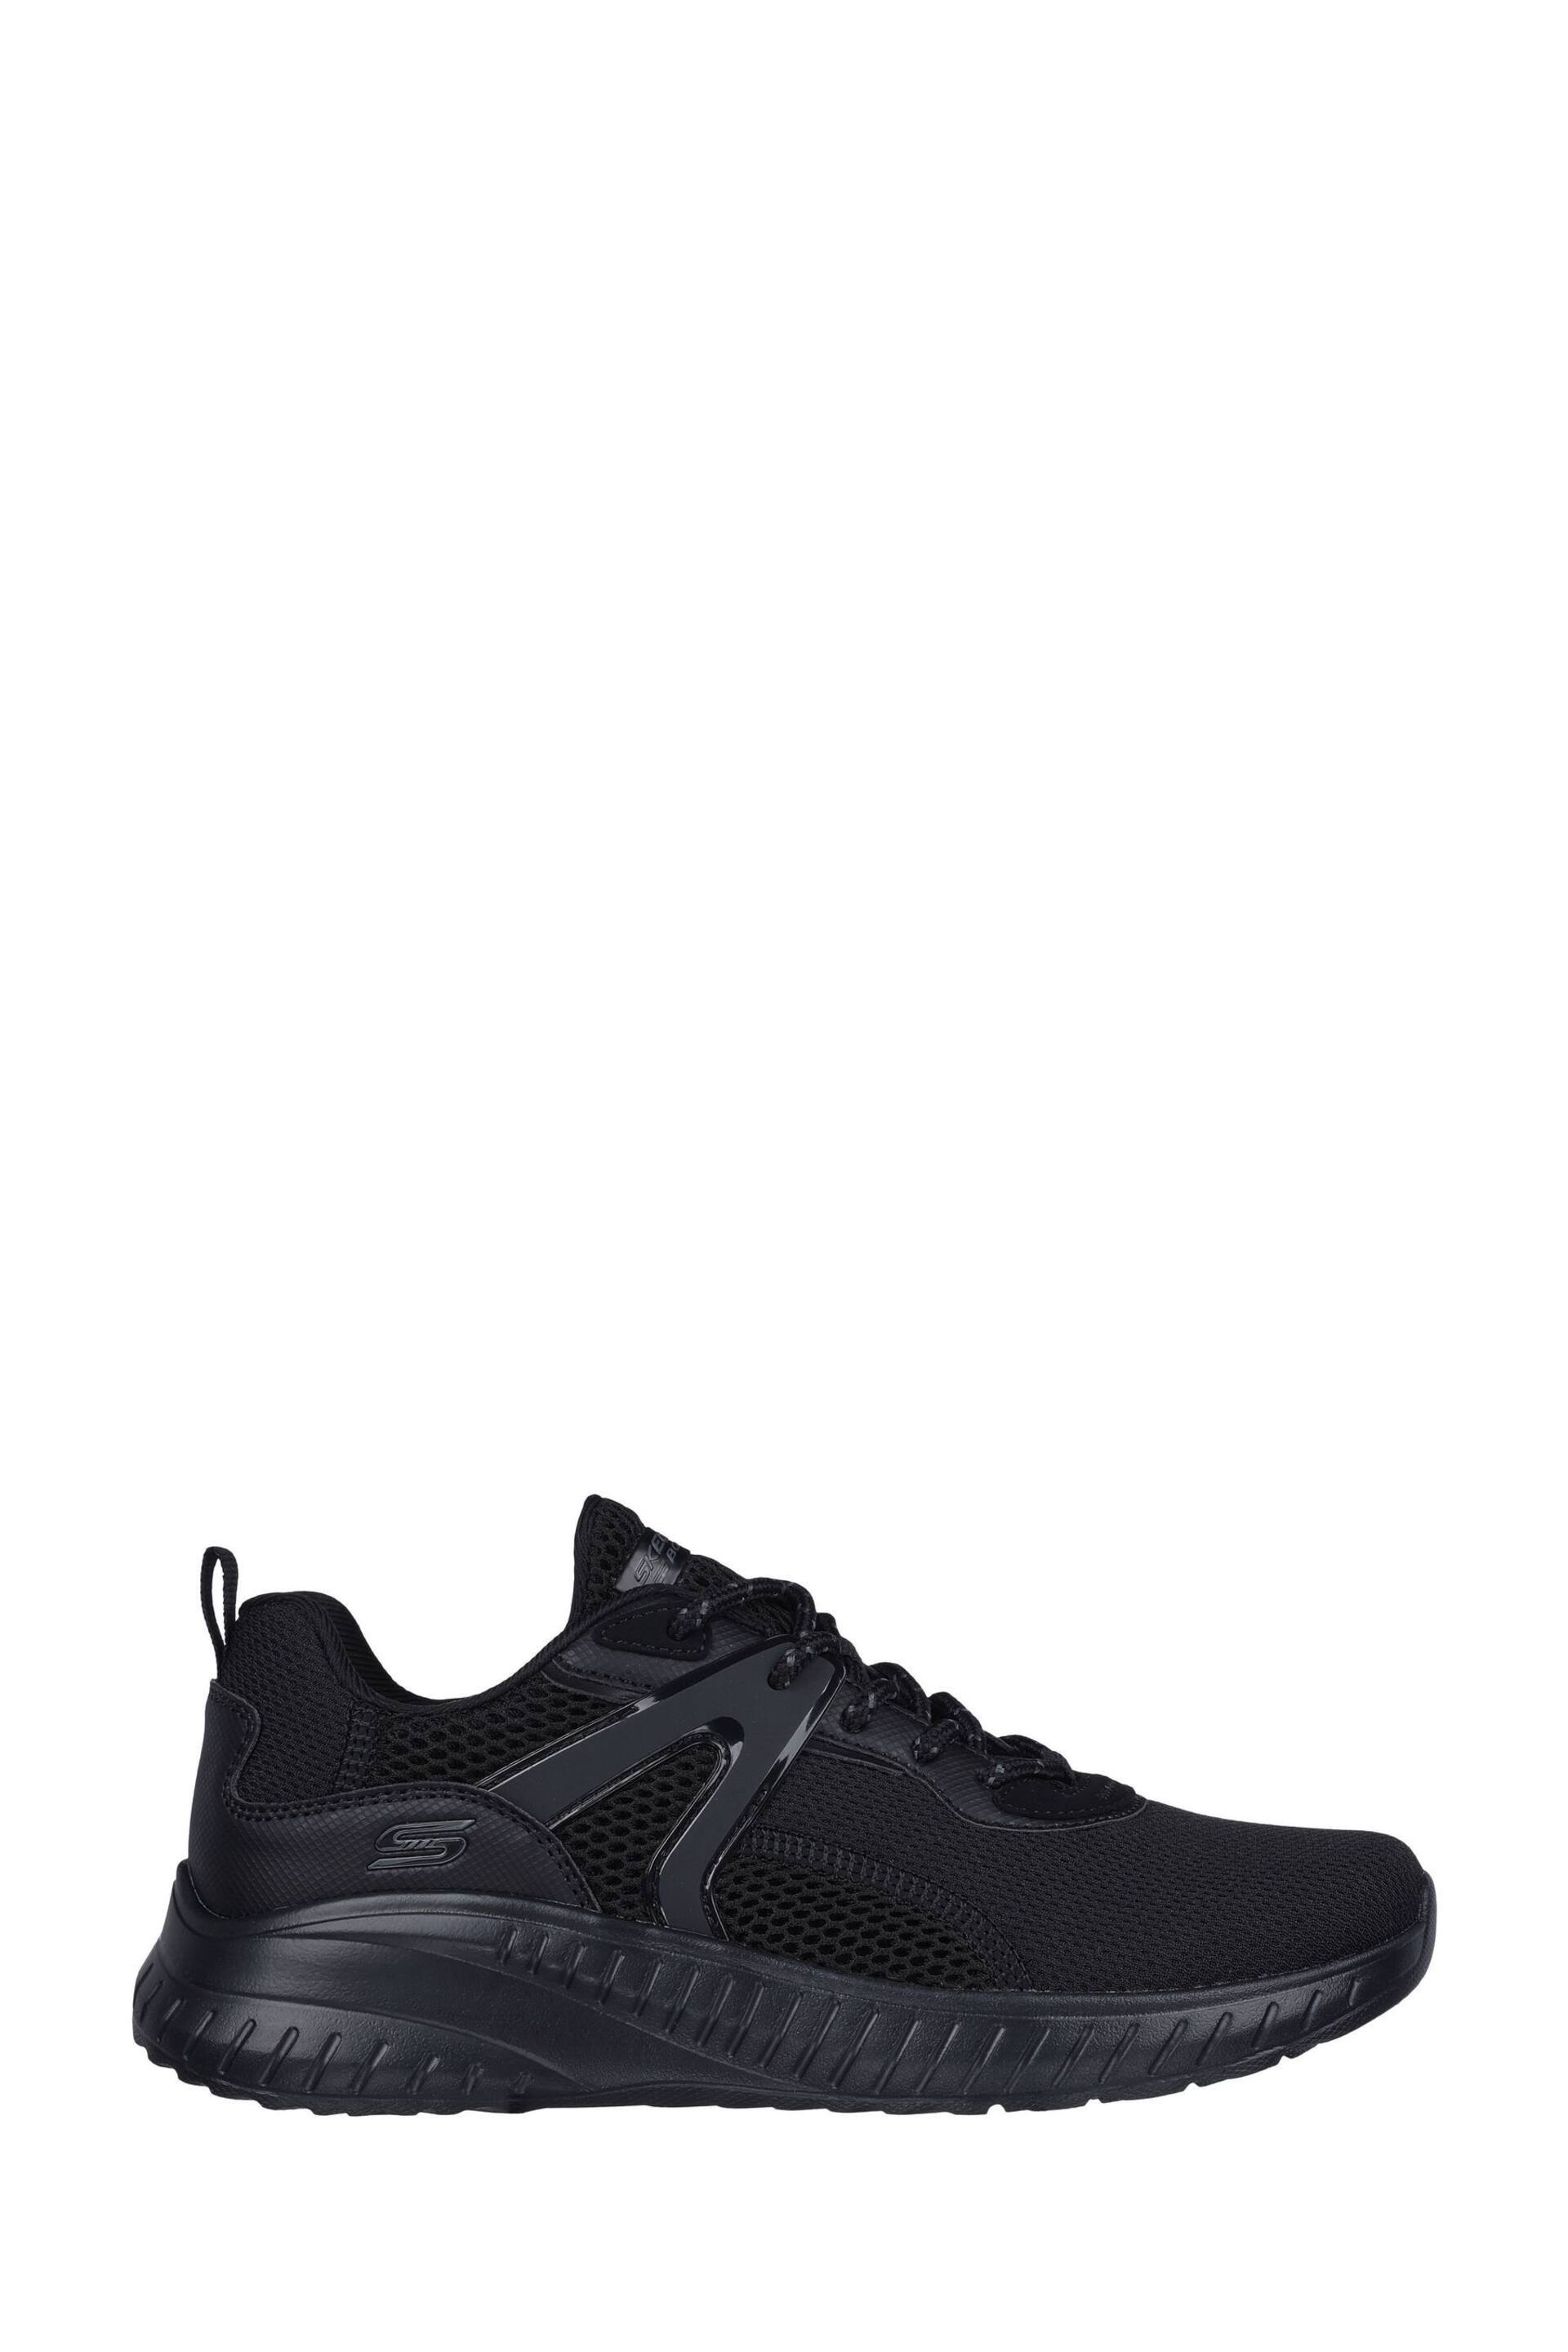 Skechers Black Ladies Bobs Squad Chaos Brilliant Synergy Trainers - Image 1 of 5